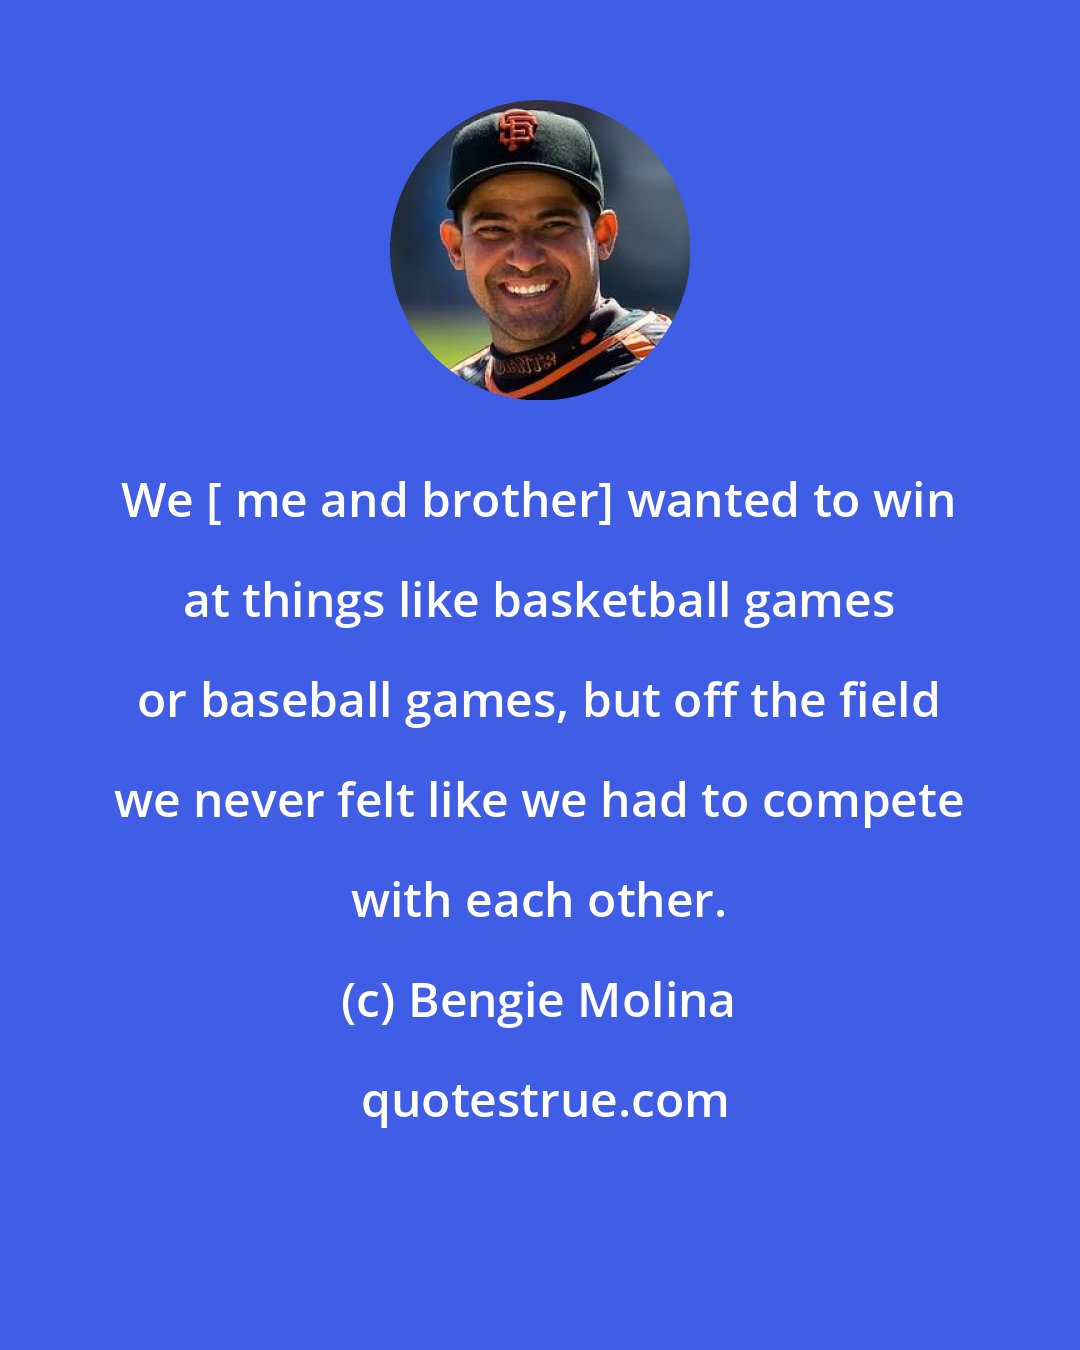 Bengie Molina: We [ me and brother] wanted to win at things like basketball games or baseball games, but off the field we never felt like we had to compete with each other.